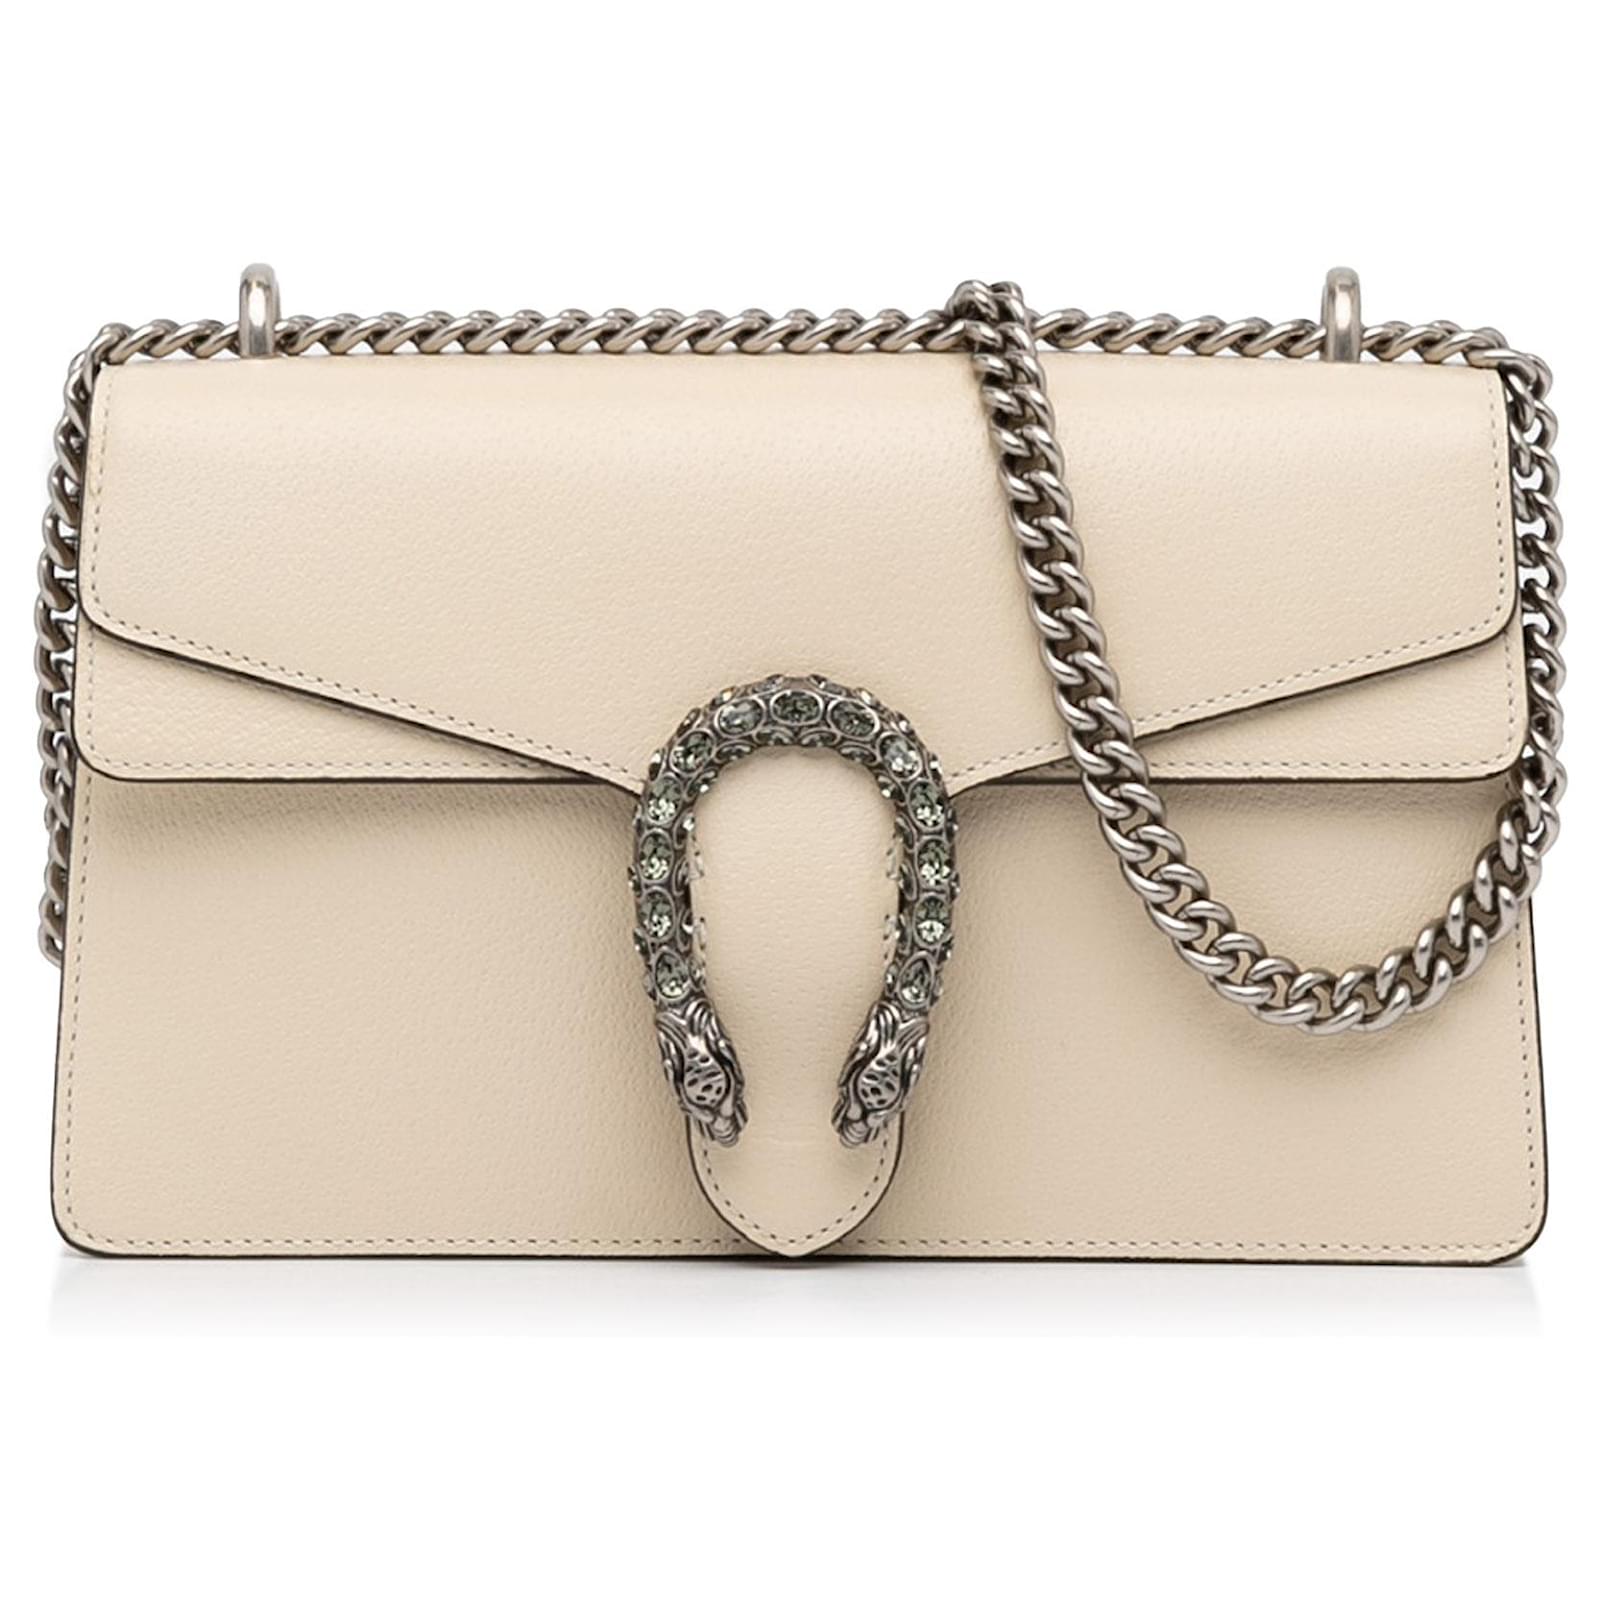 Gucci, Bags, Gucci Dionysus Small White Leather Shoulder Bag